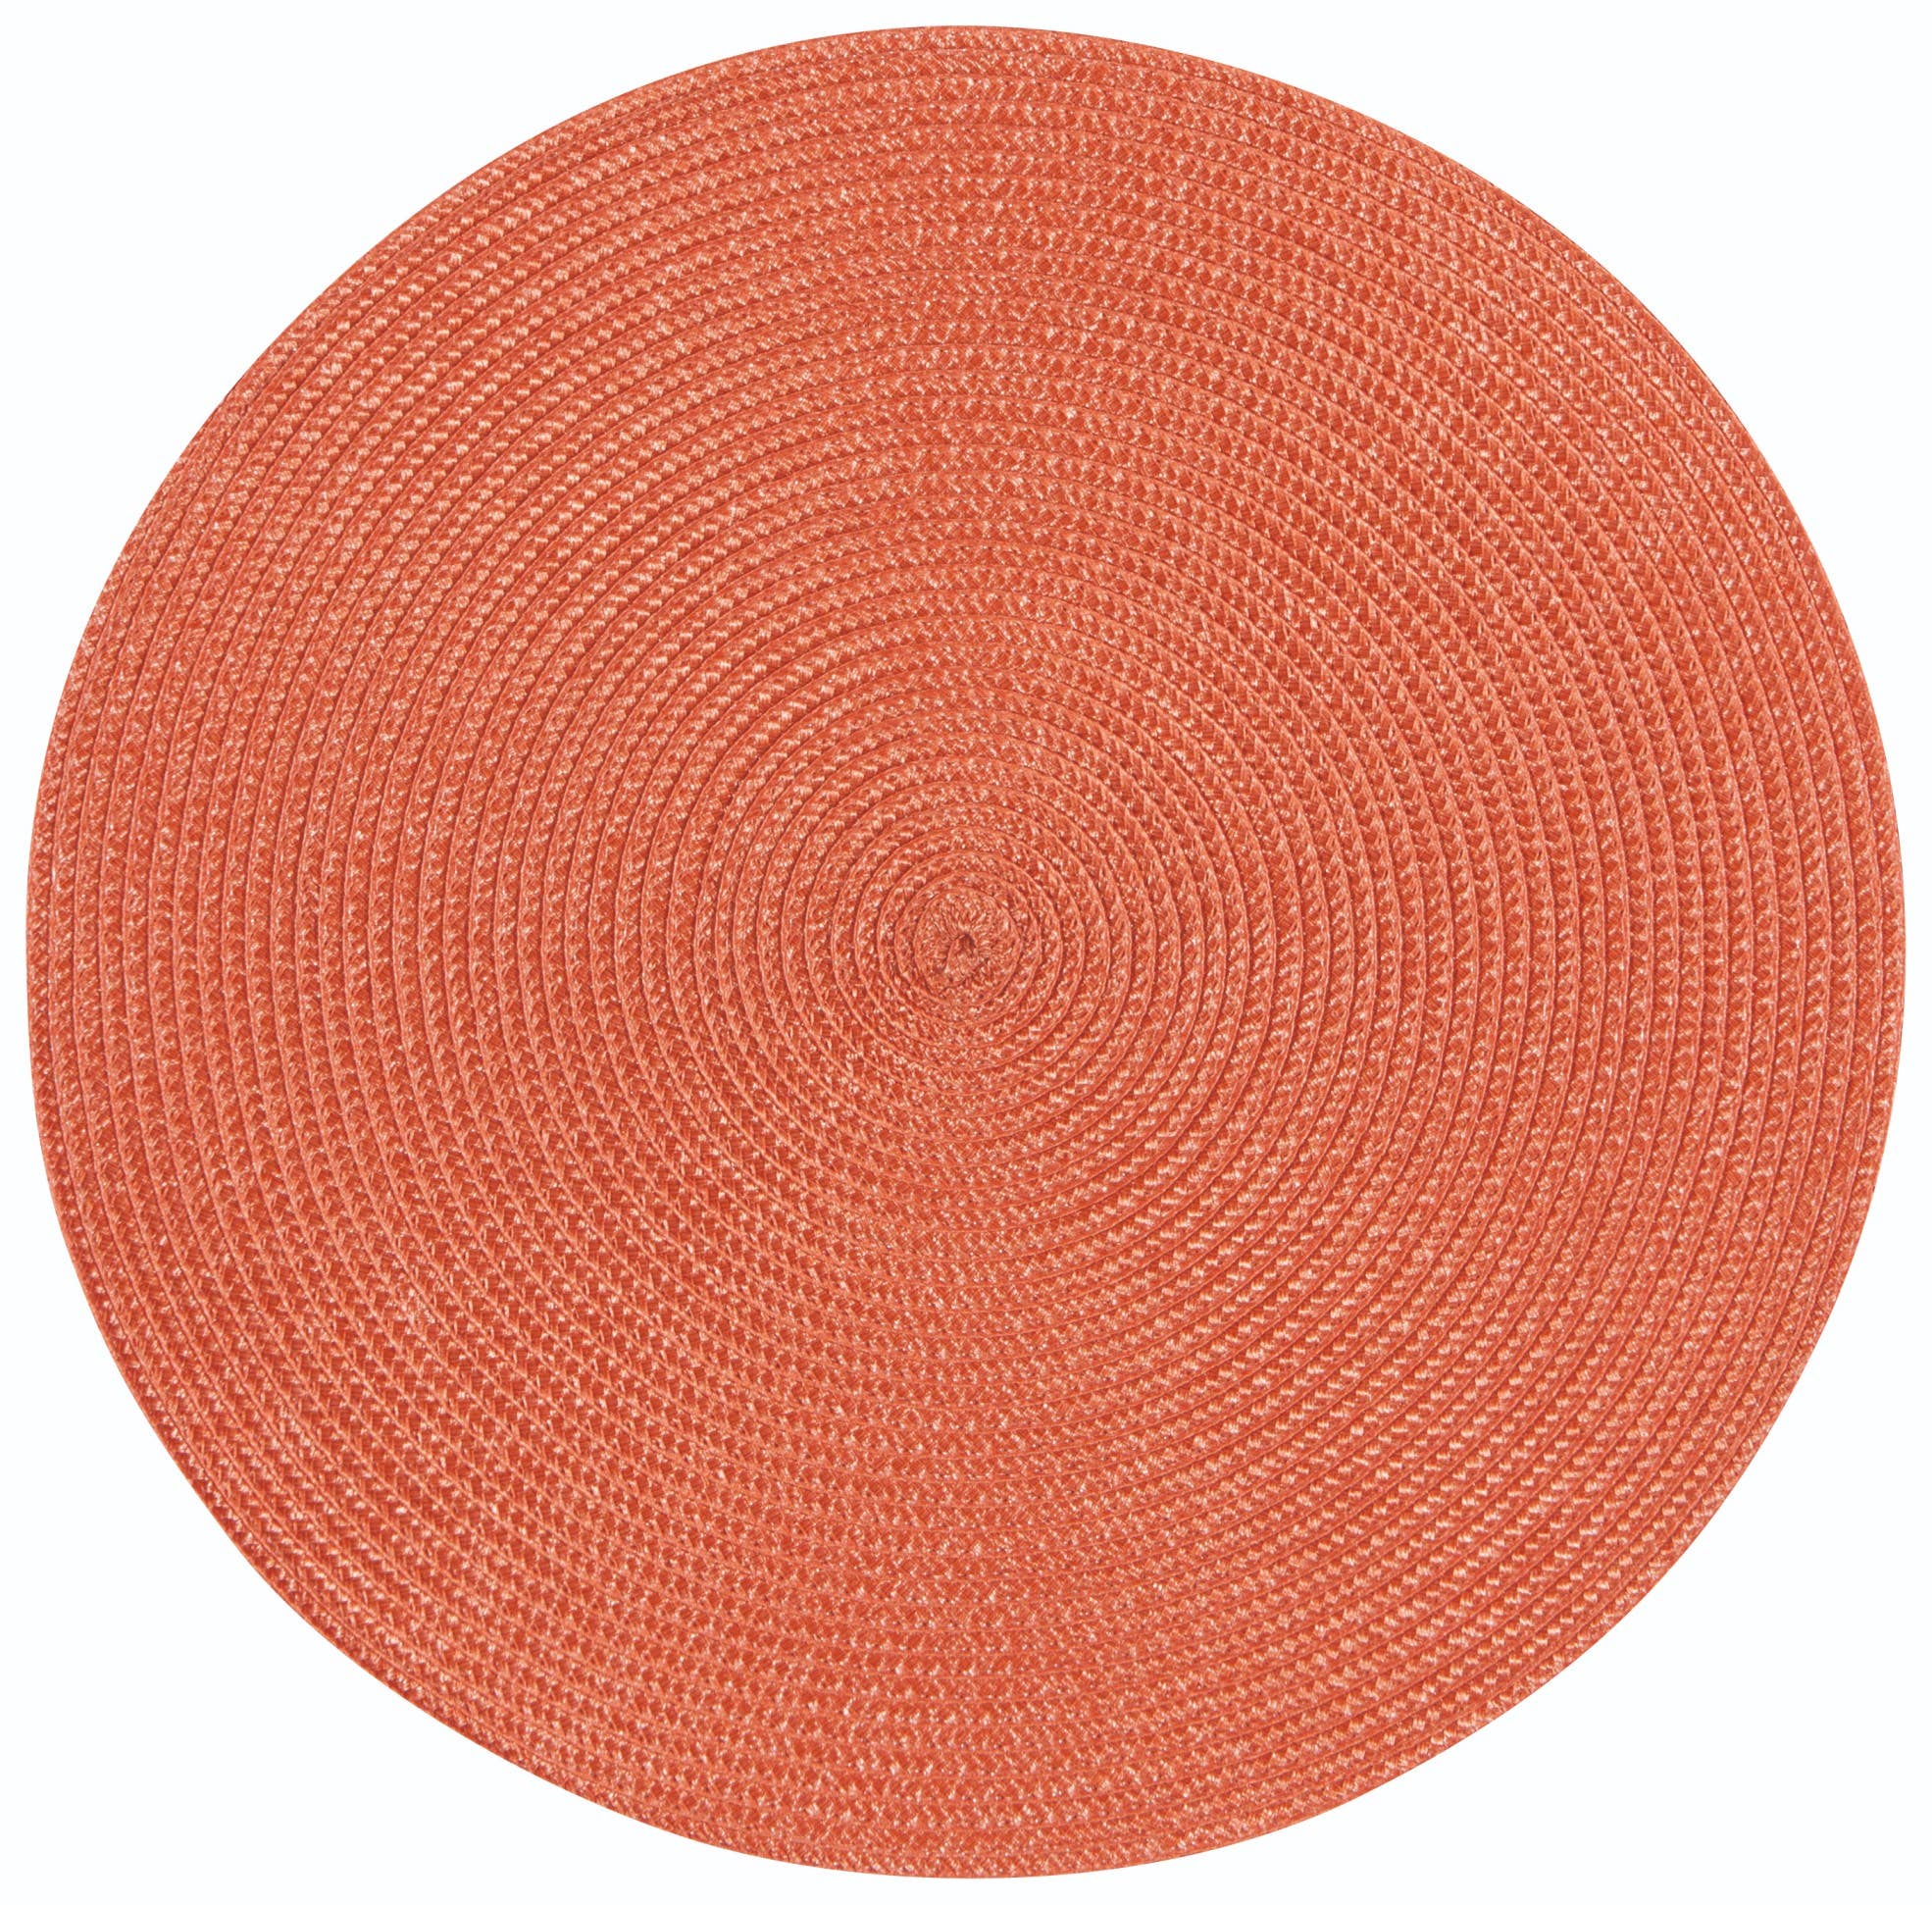 Now Designs by Danica - Disko Rust Round Placemat